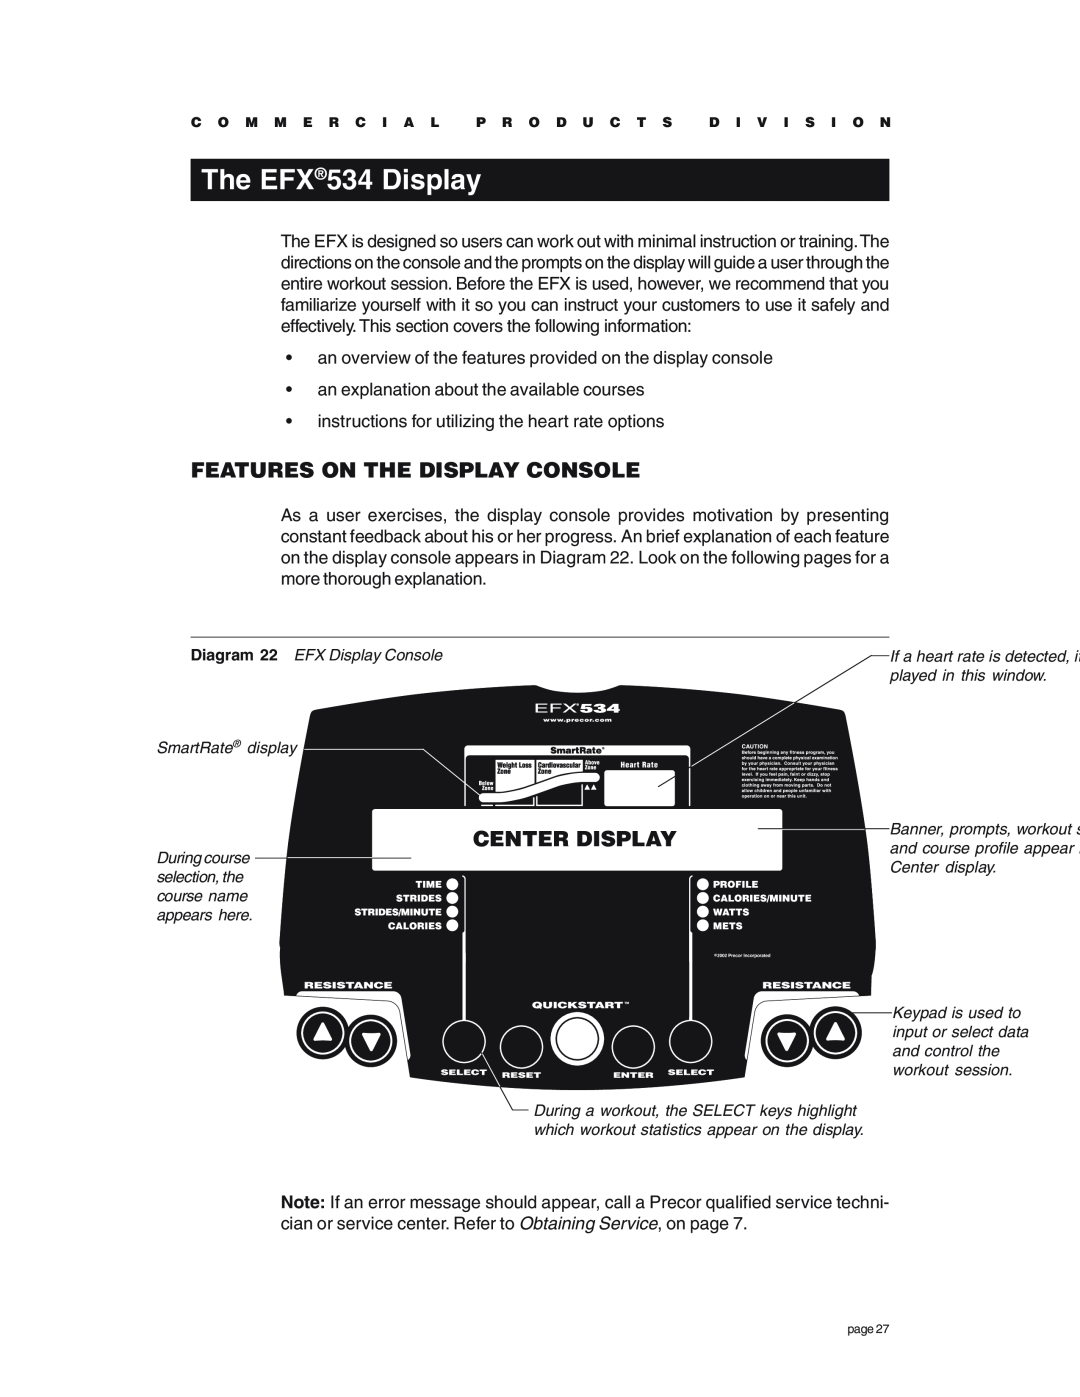 Precor owner manual The EFX534 Display, Features On The Display Console, Center Display 